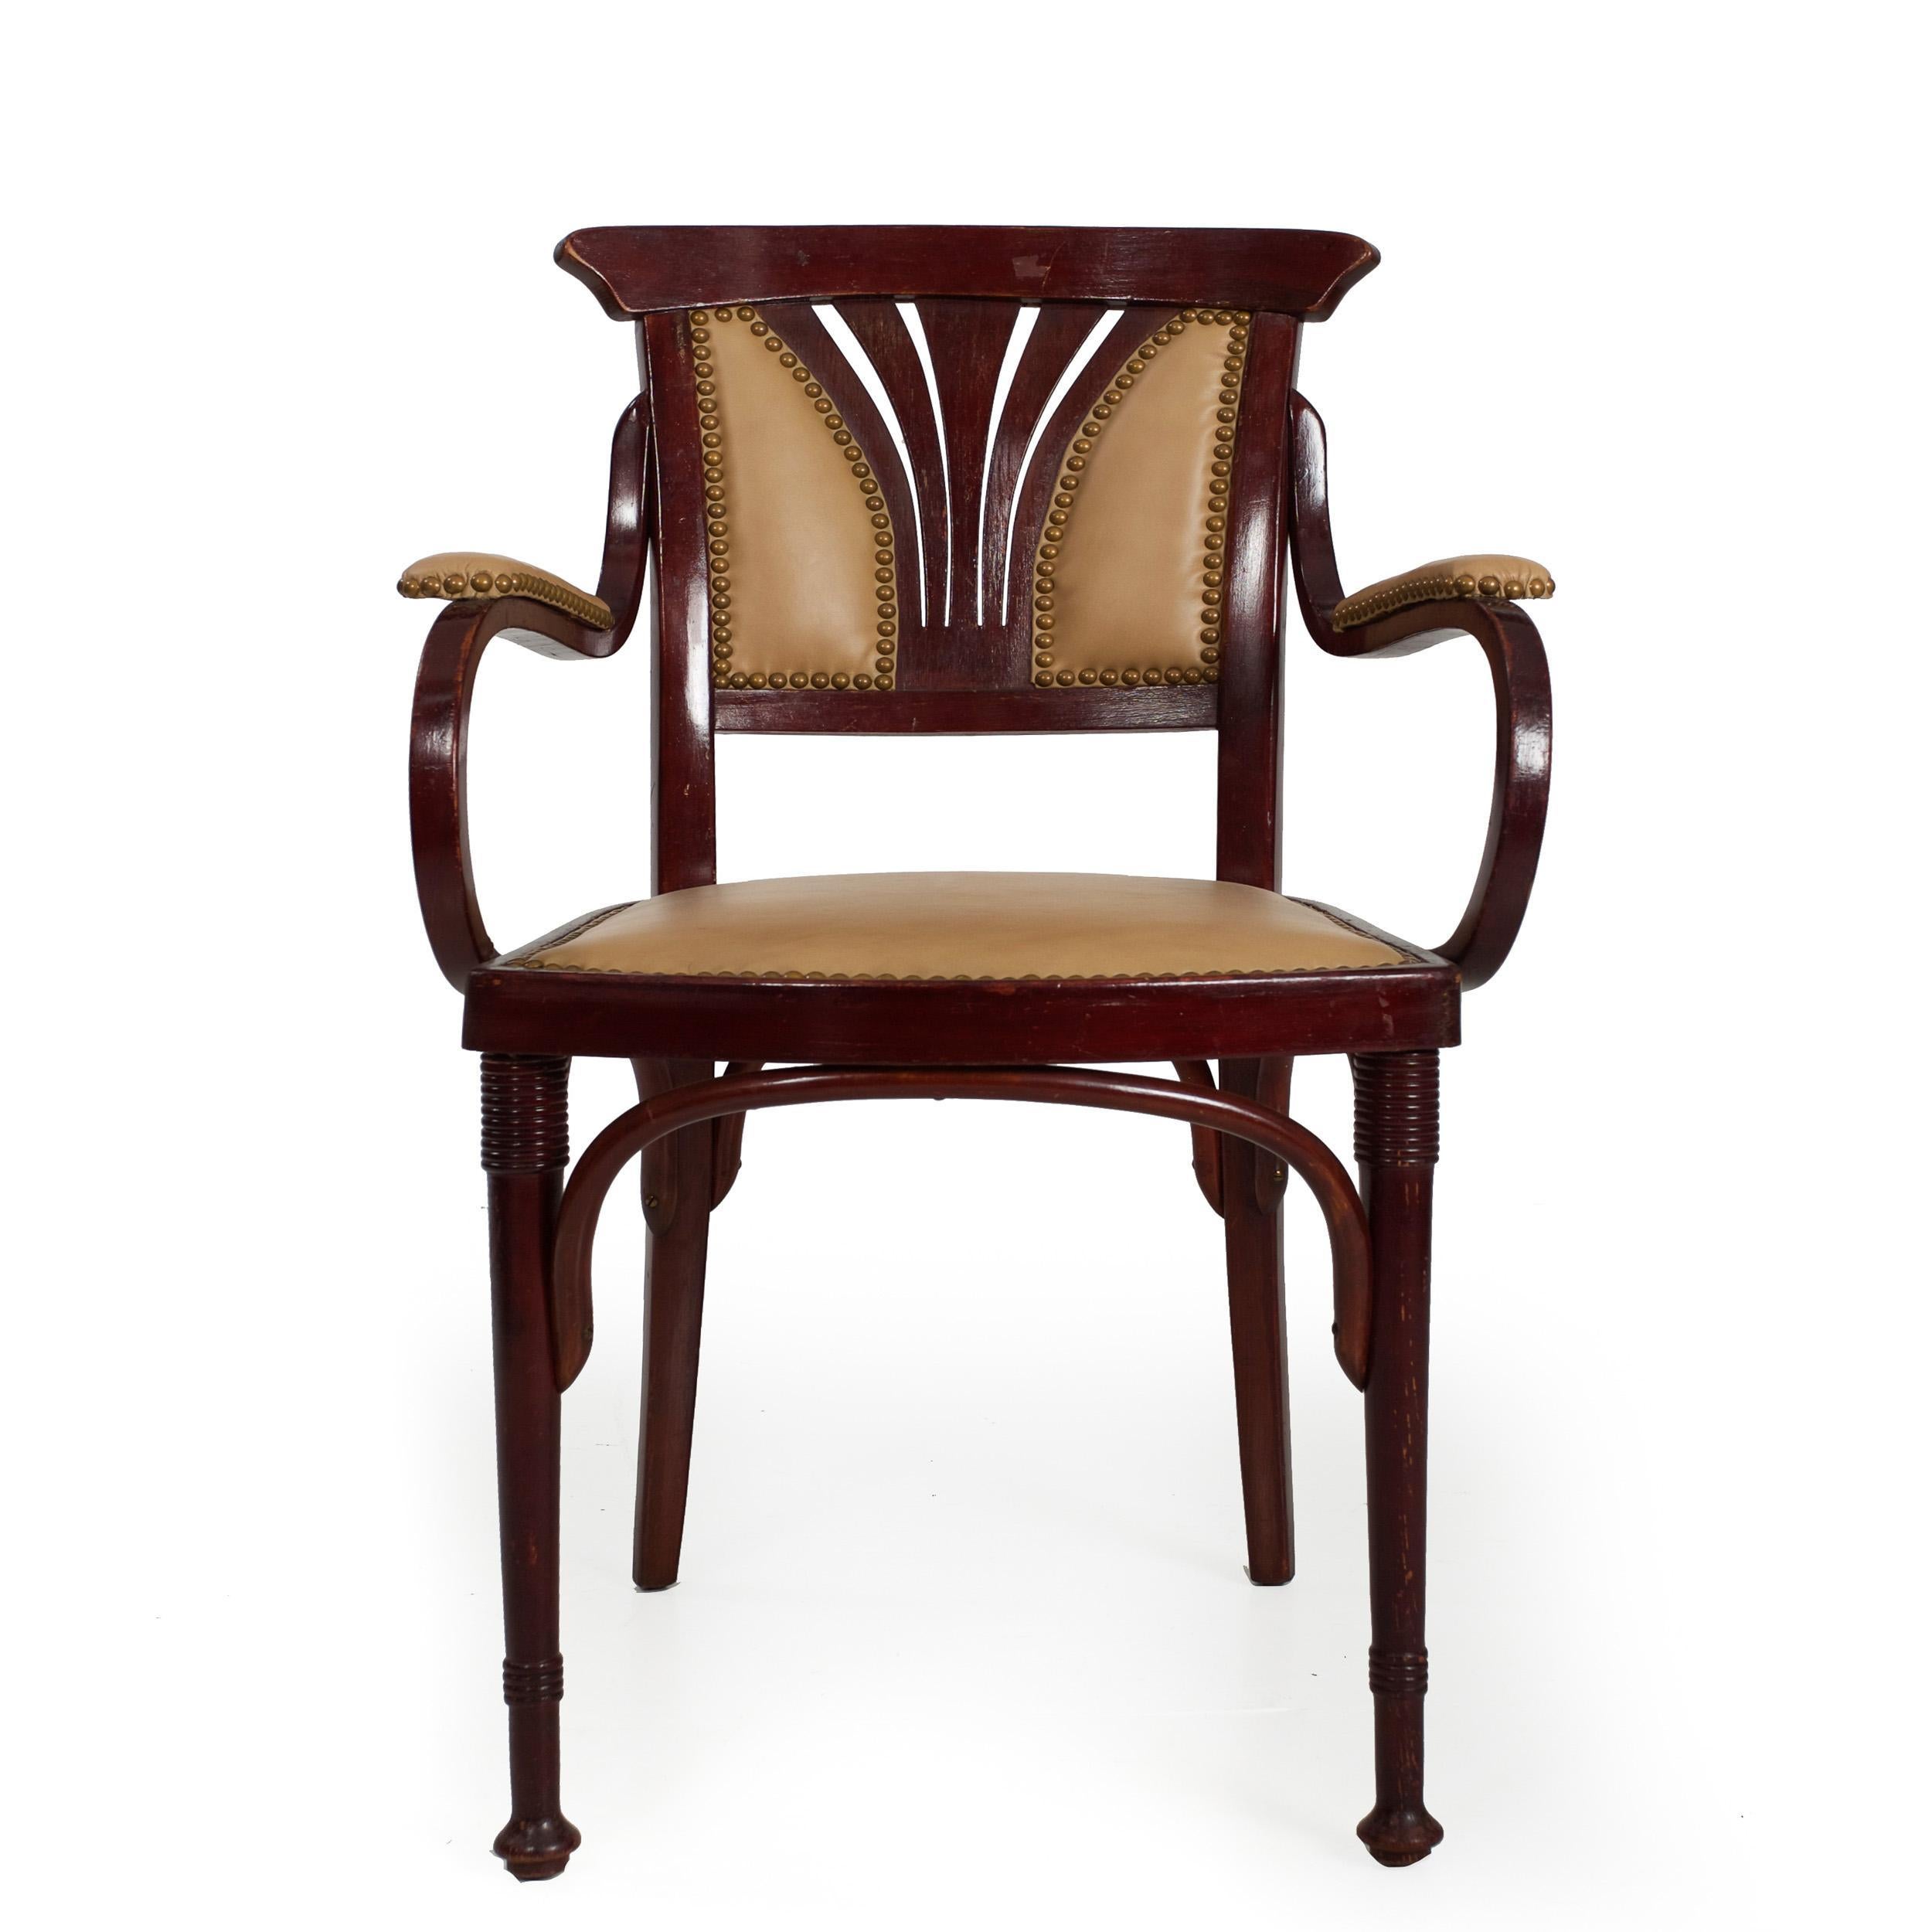 VIENNA SECESSIONIST BENTWOOD ARM CHAIR BY JACOB AND JOSEF KOHN
Stamped to the underside 